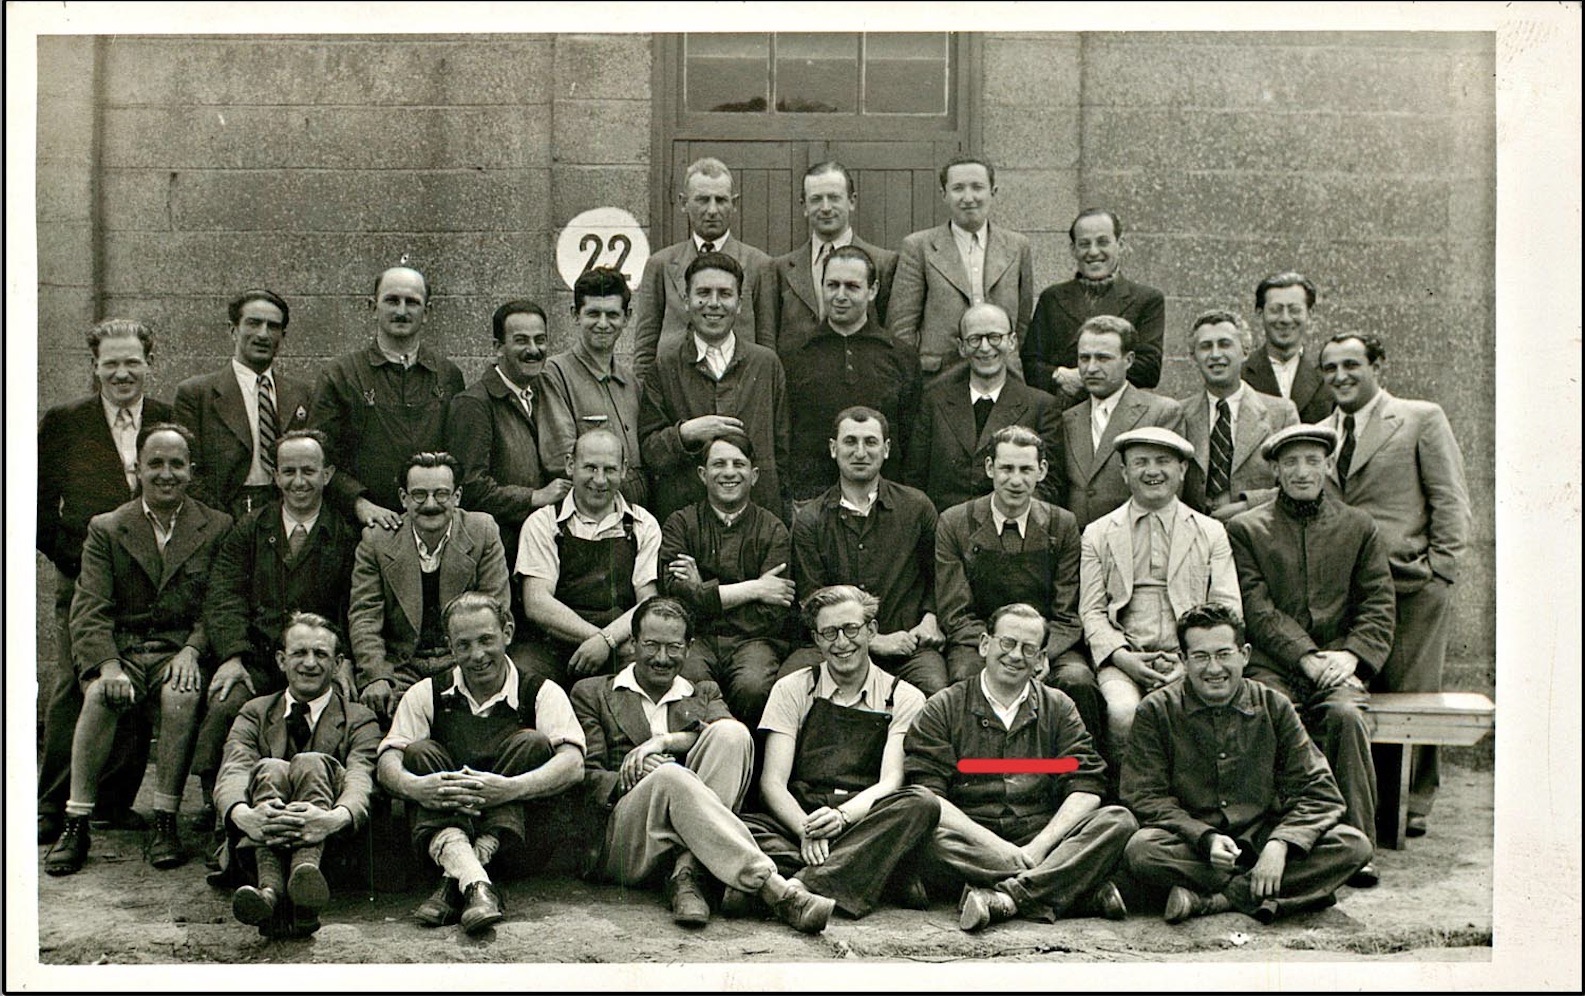 Recognised in group photograph, Heinz Dehn, Kitchener camp, 1939